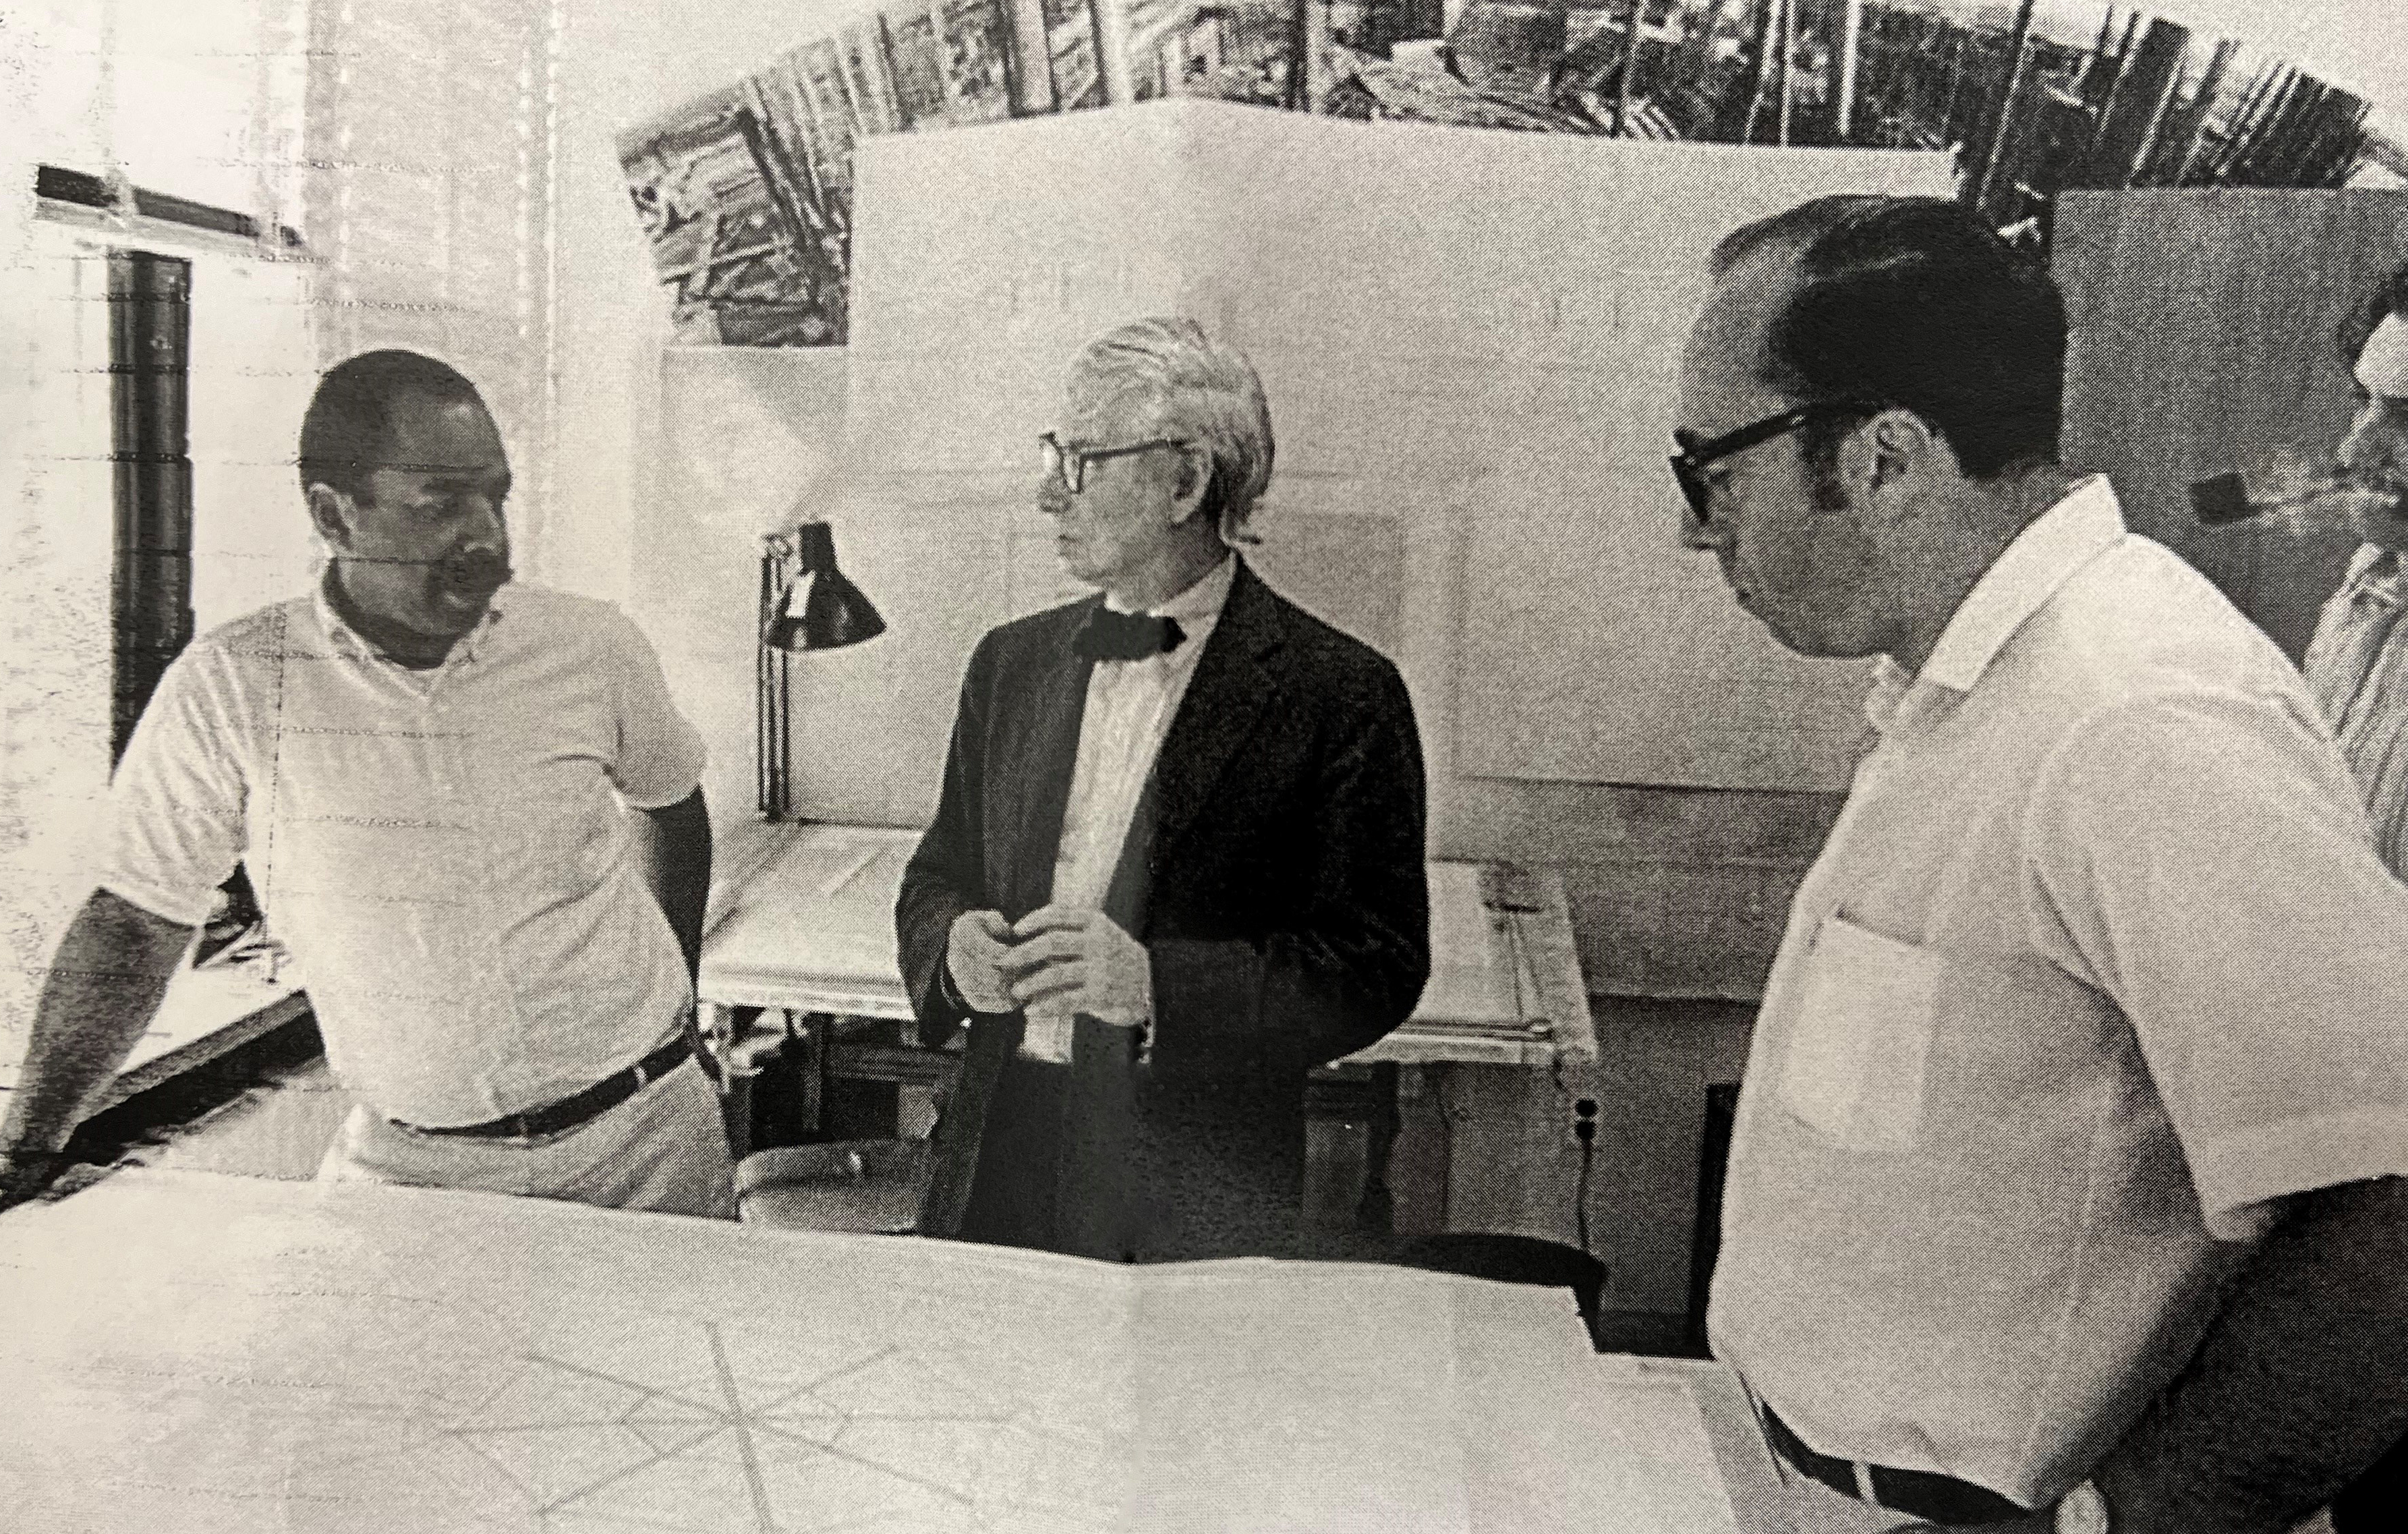 Copy of a snapshot of Kahn and staff circa 1969 with panorama in background